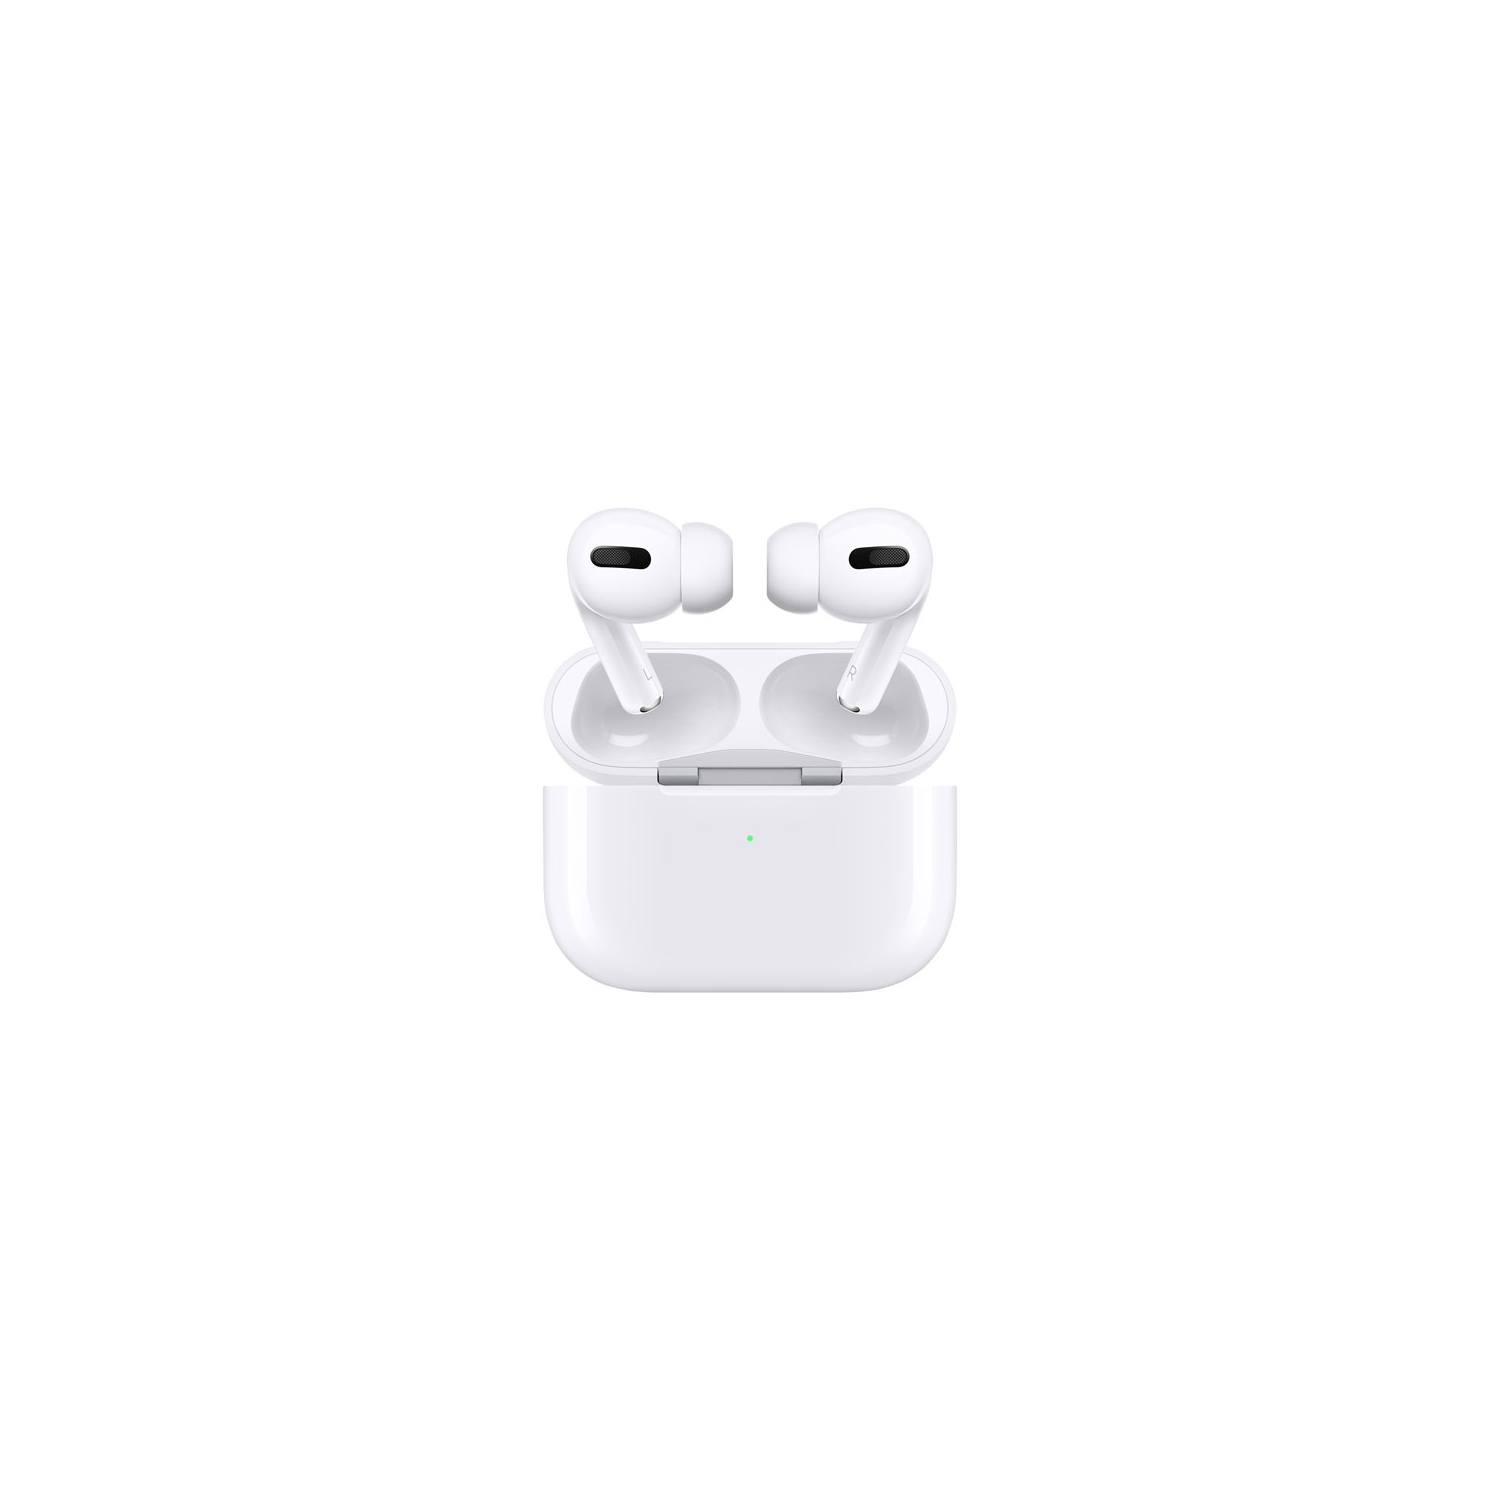 Apple AirPods Pro In-Ear Noise Cancelling Truly Wireless Headphones with MagSafe Charging Case - White - Open Box